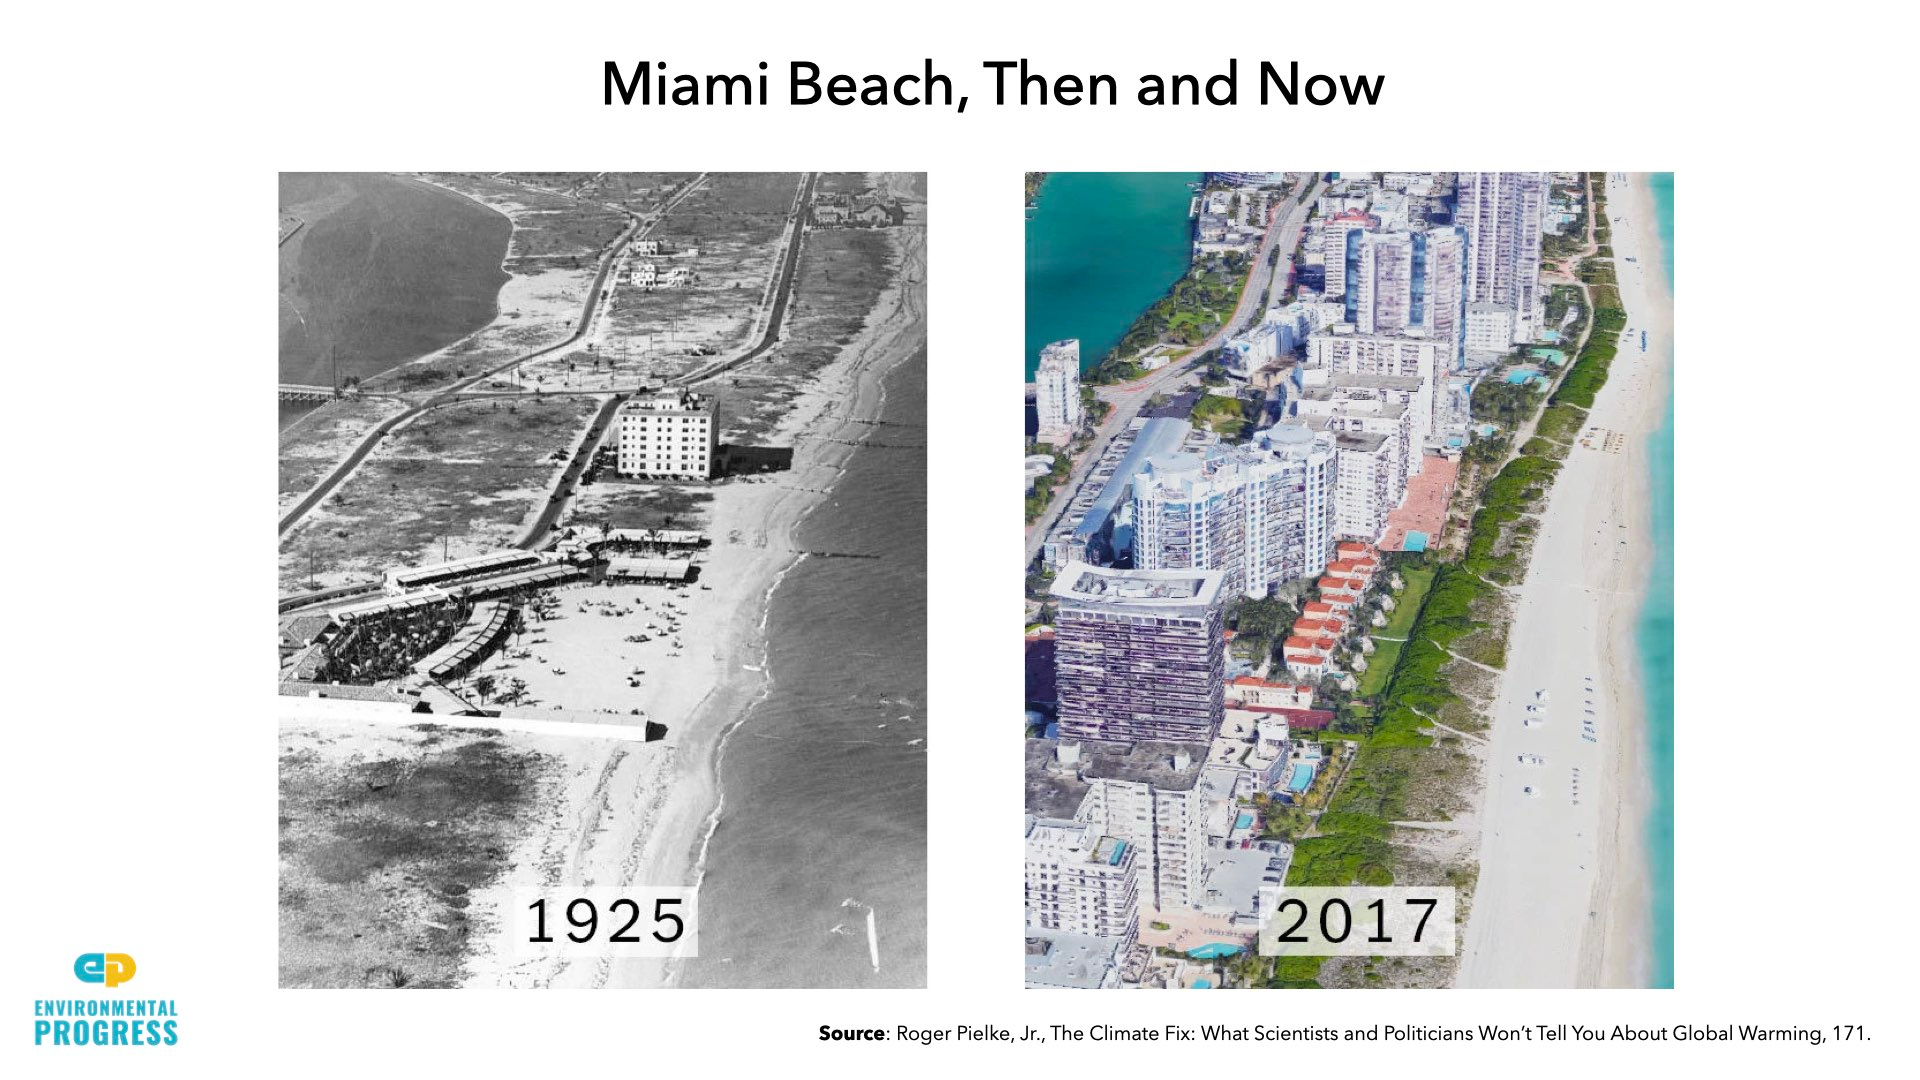 Miami Beach Then and Now (1925 and 2017)